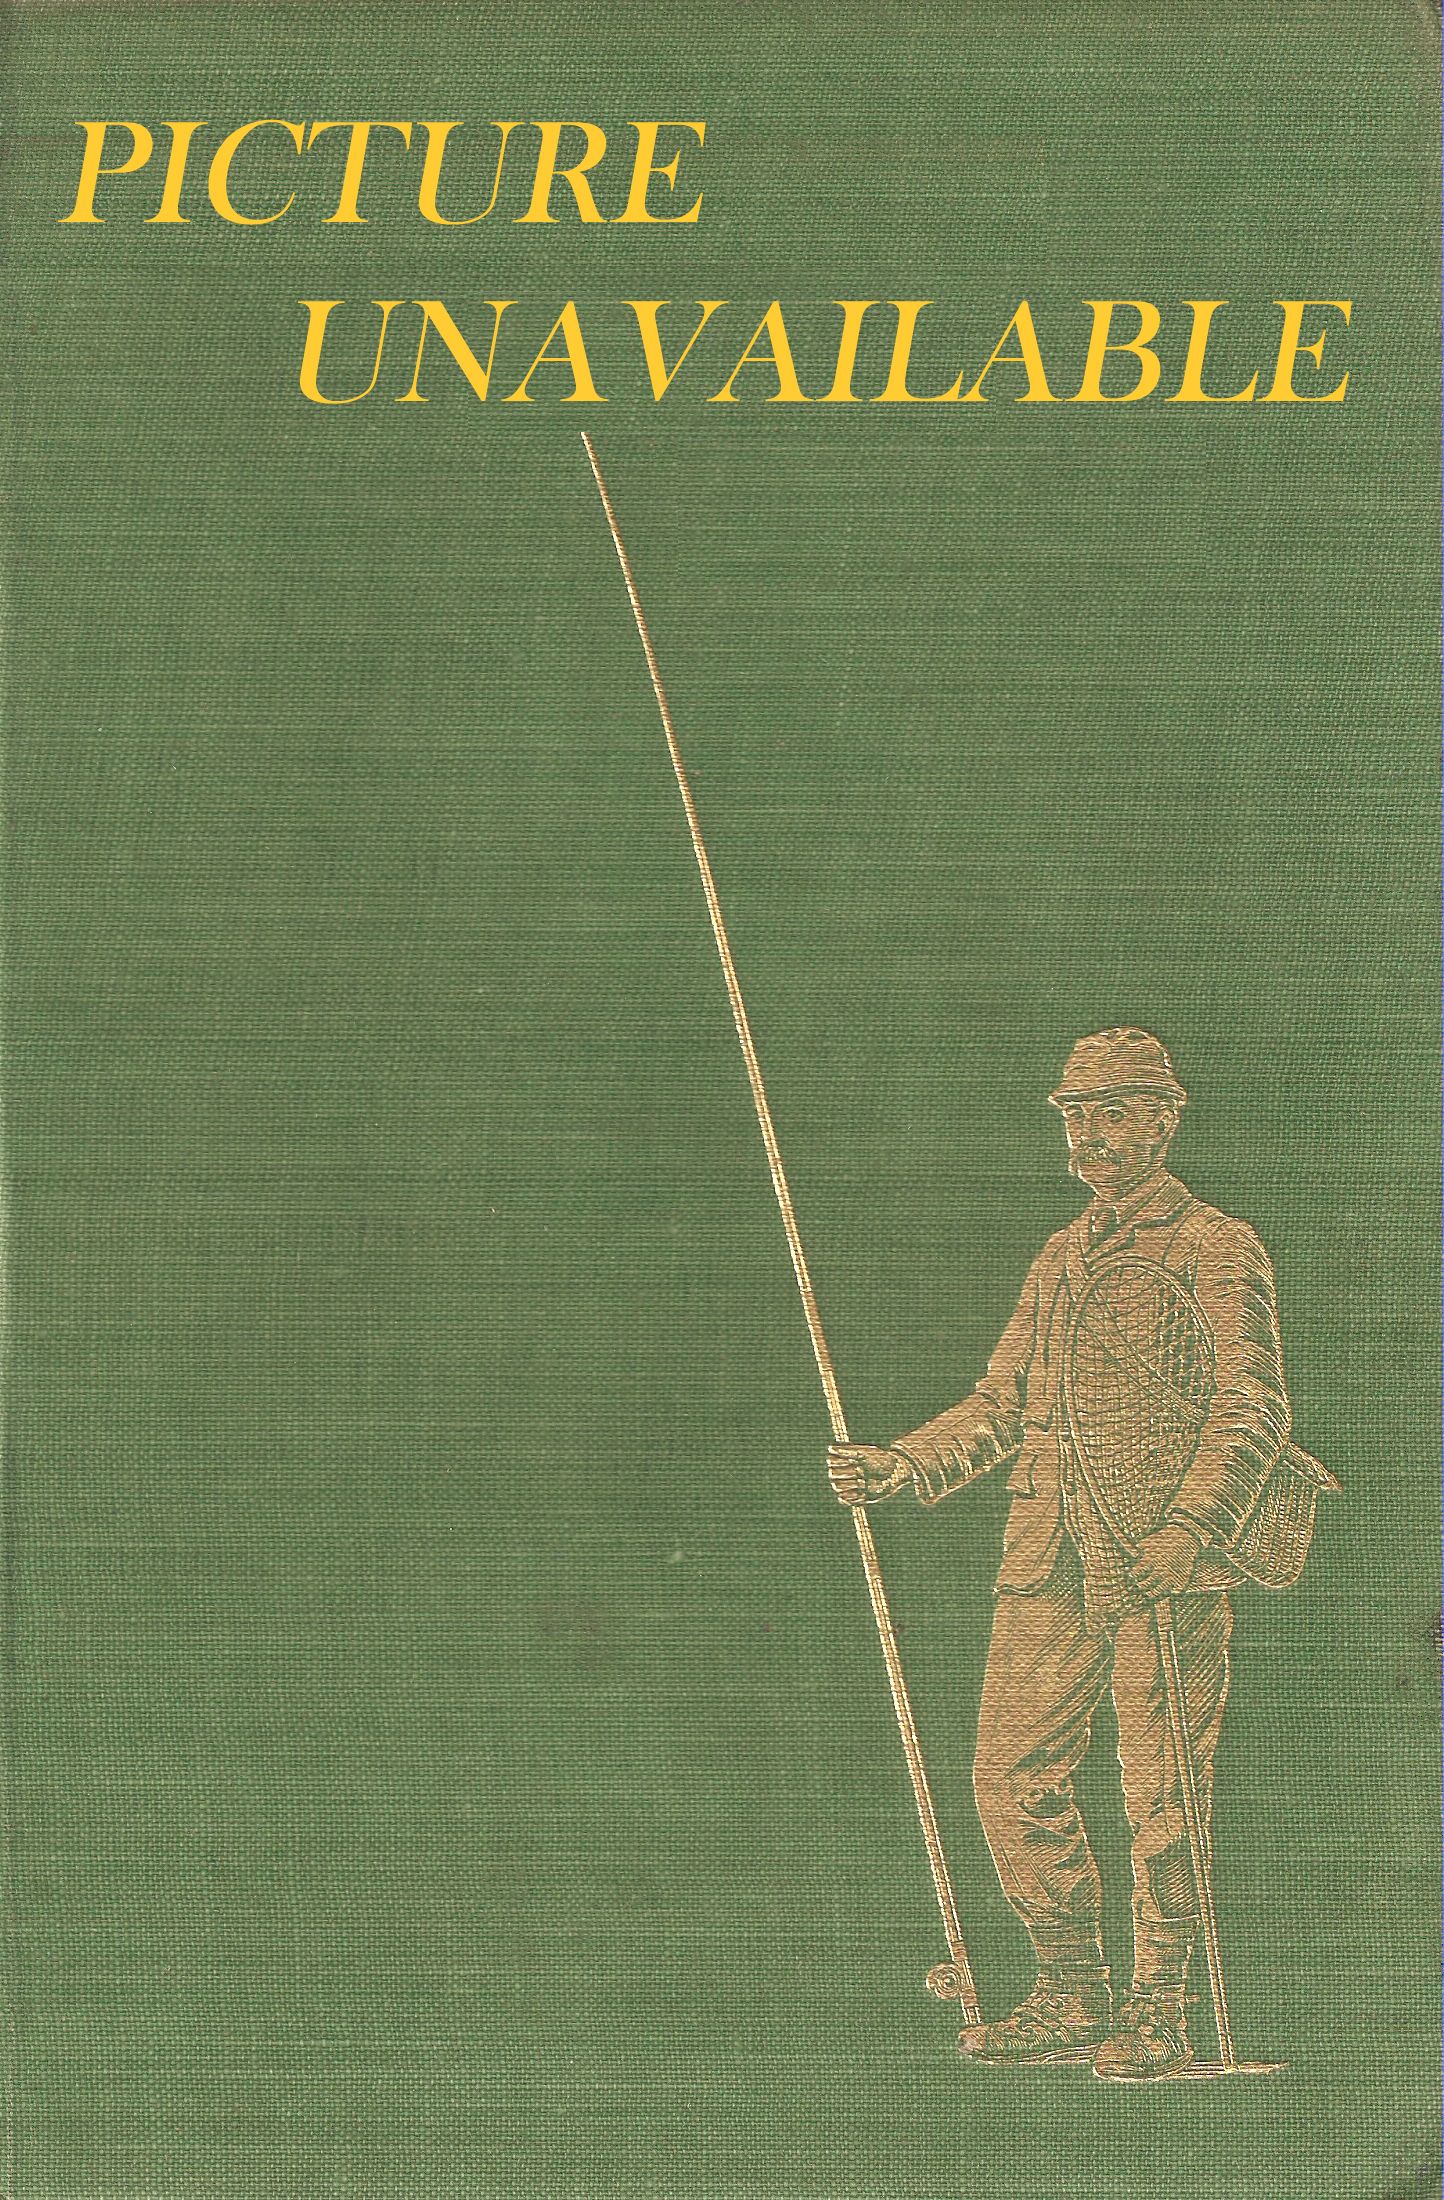 ANGLING AT LOCHBOISDALE, SOUTH UIST: NOTES ON AN ANGLING JOURNAL  1882-1937. By Major R.A. Chrystal (